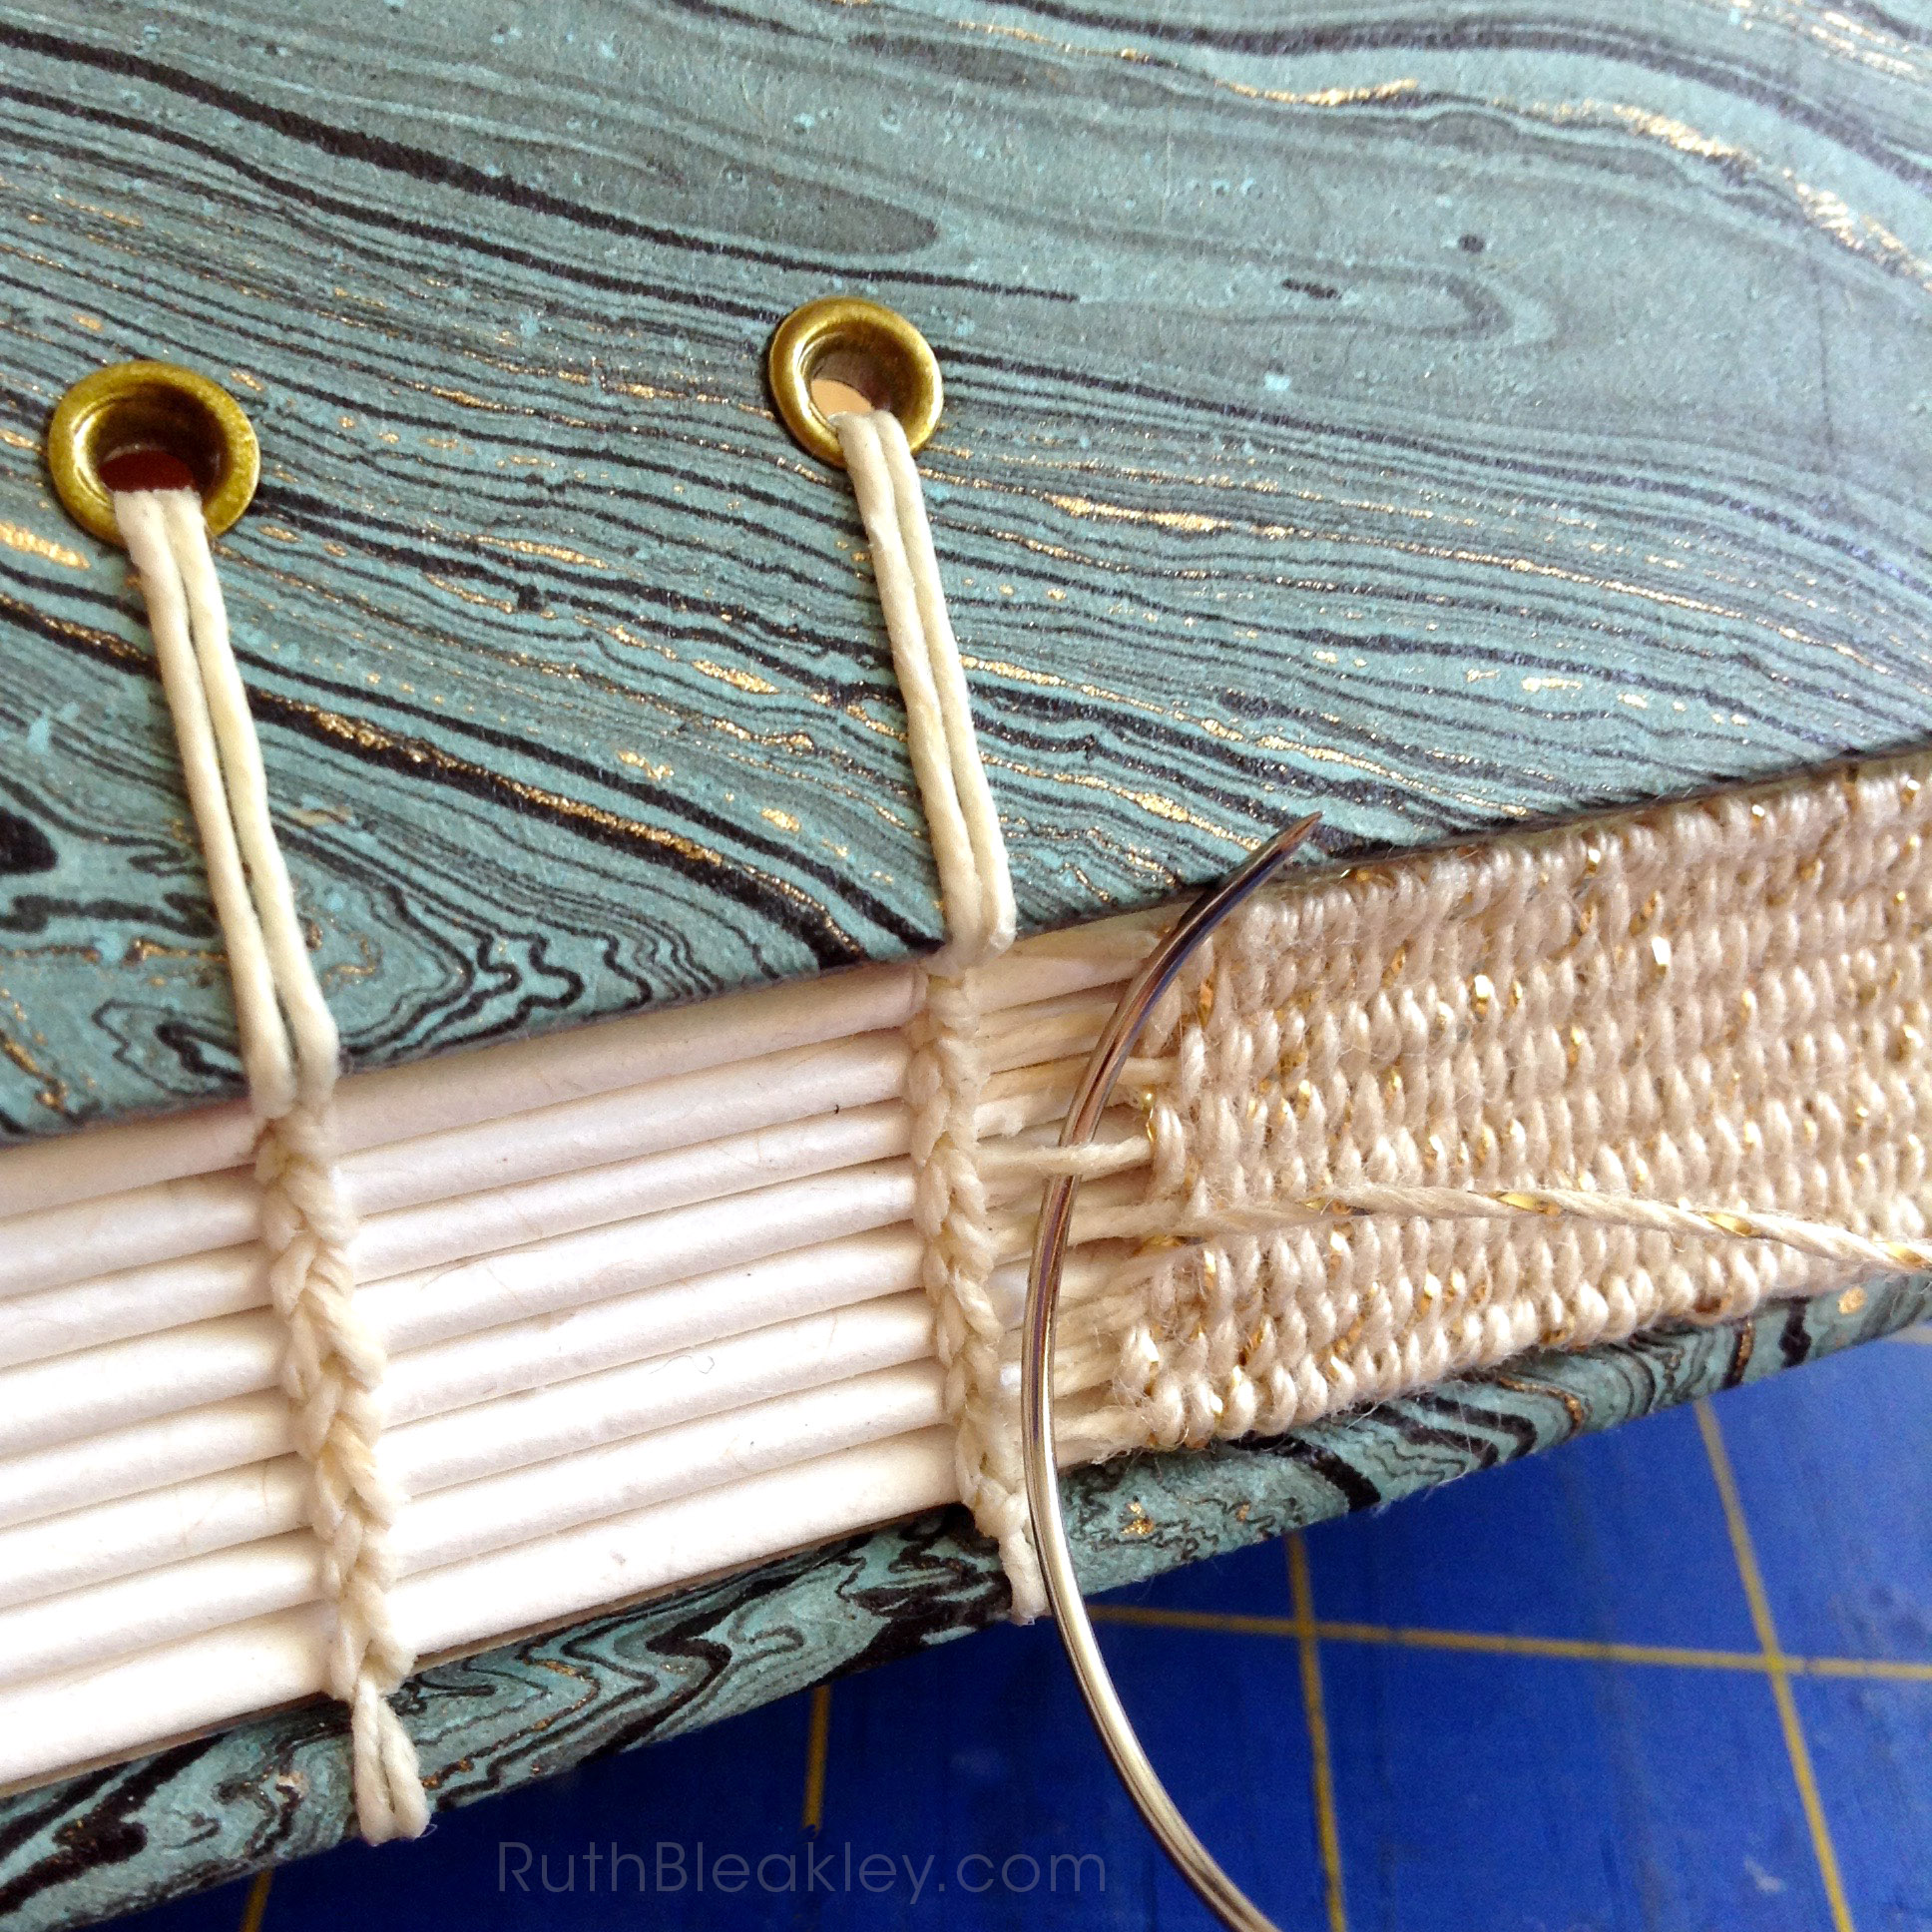 Woven spine on a handmade book using gold and white thread.